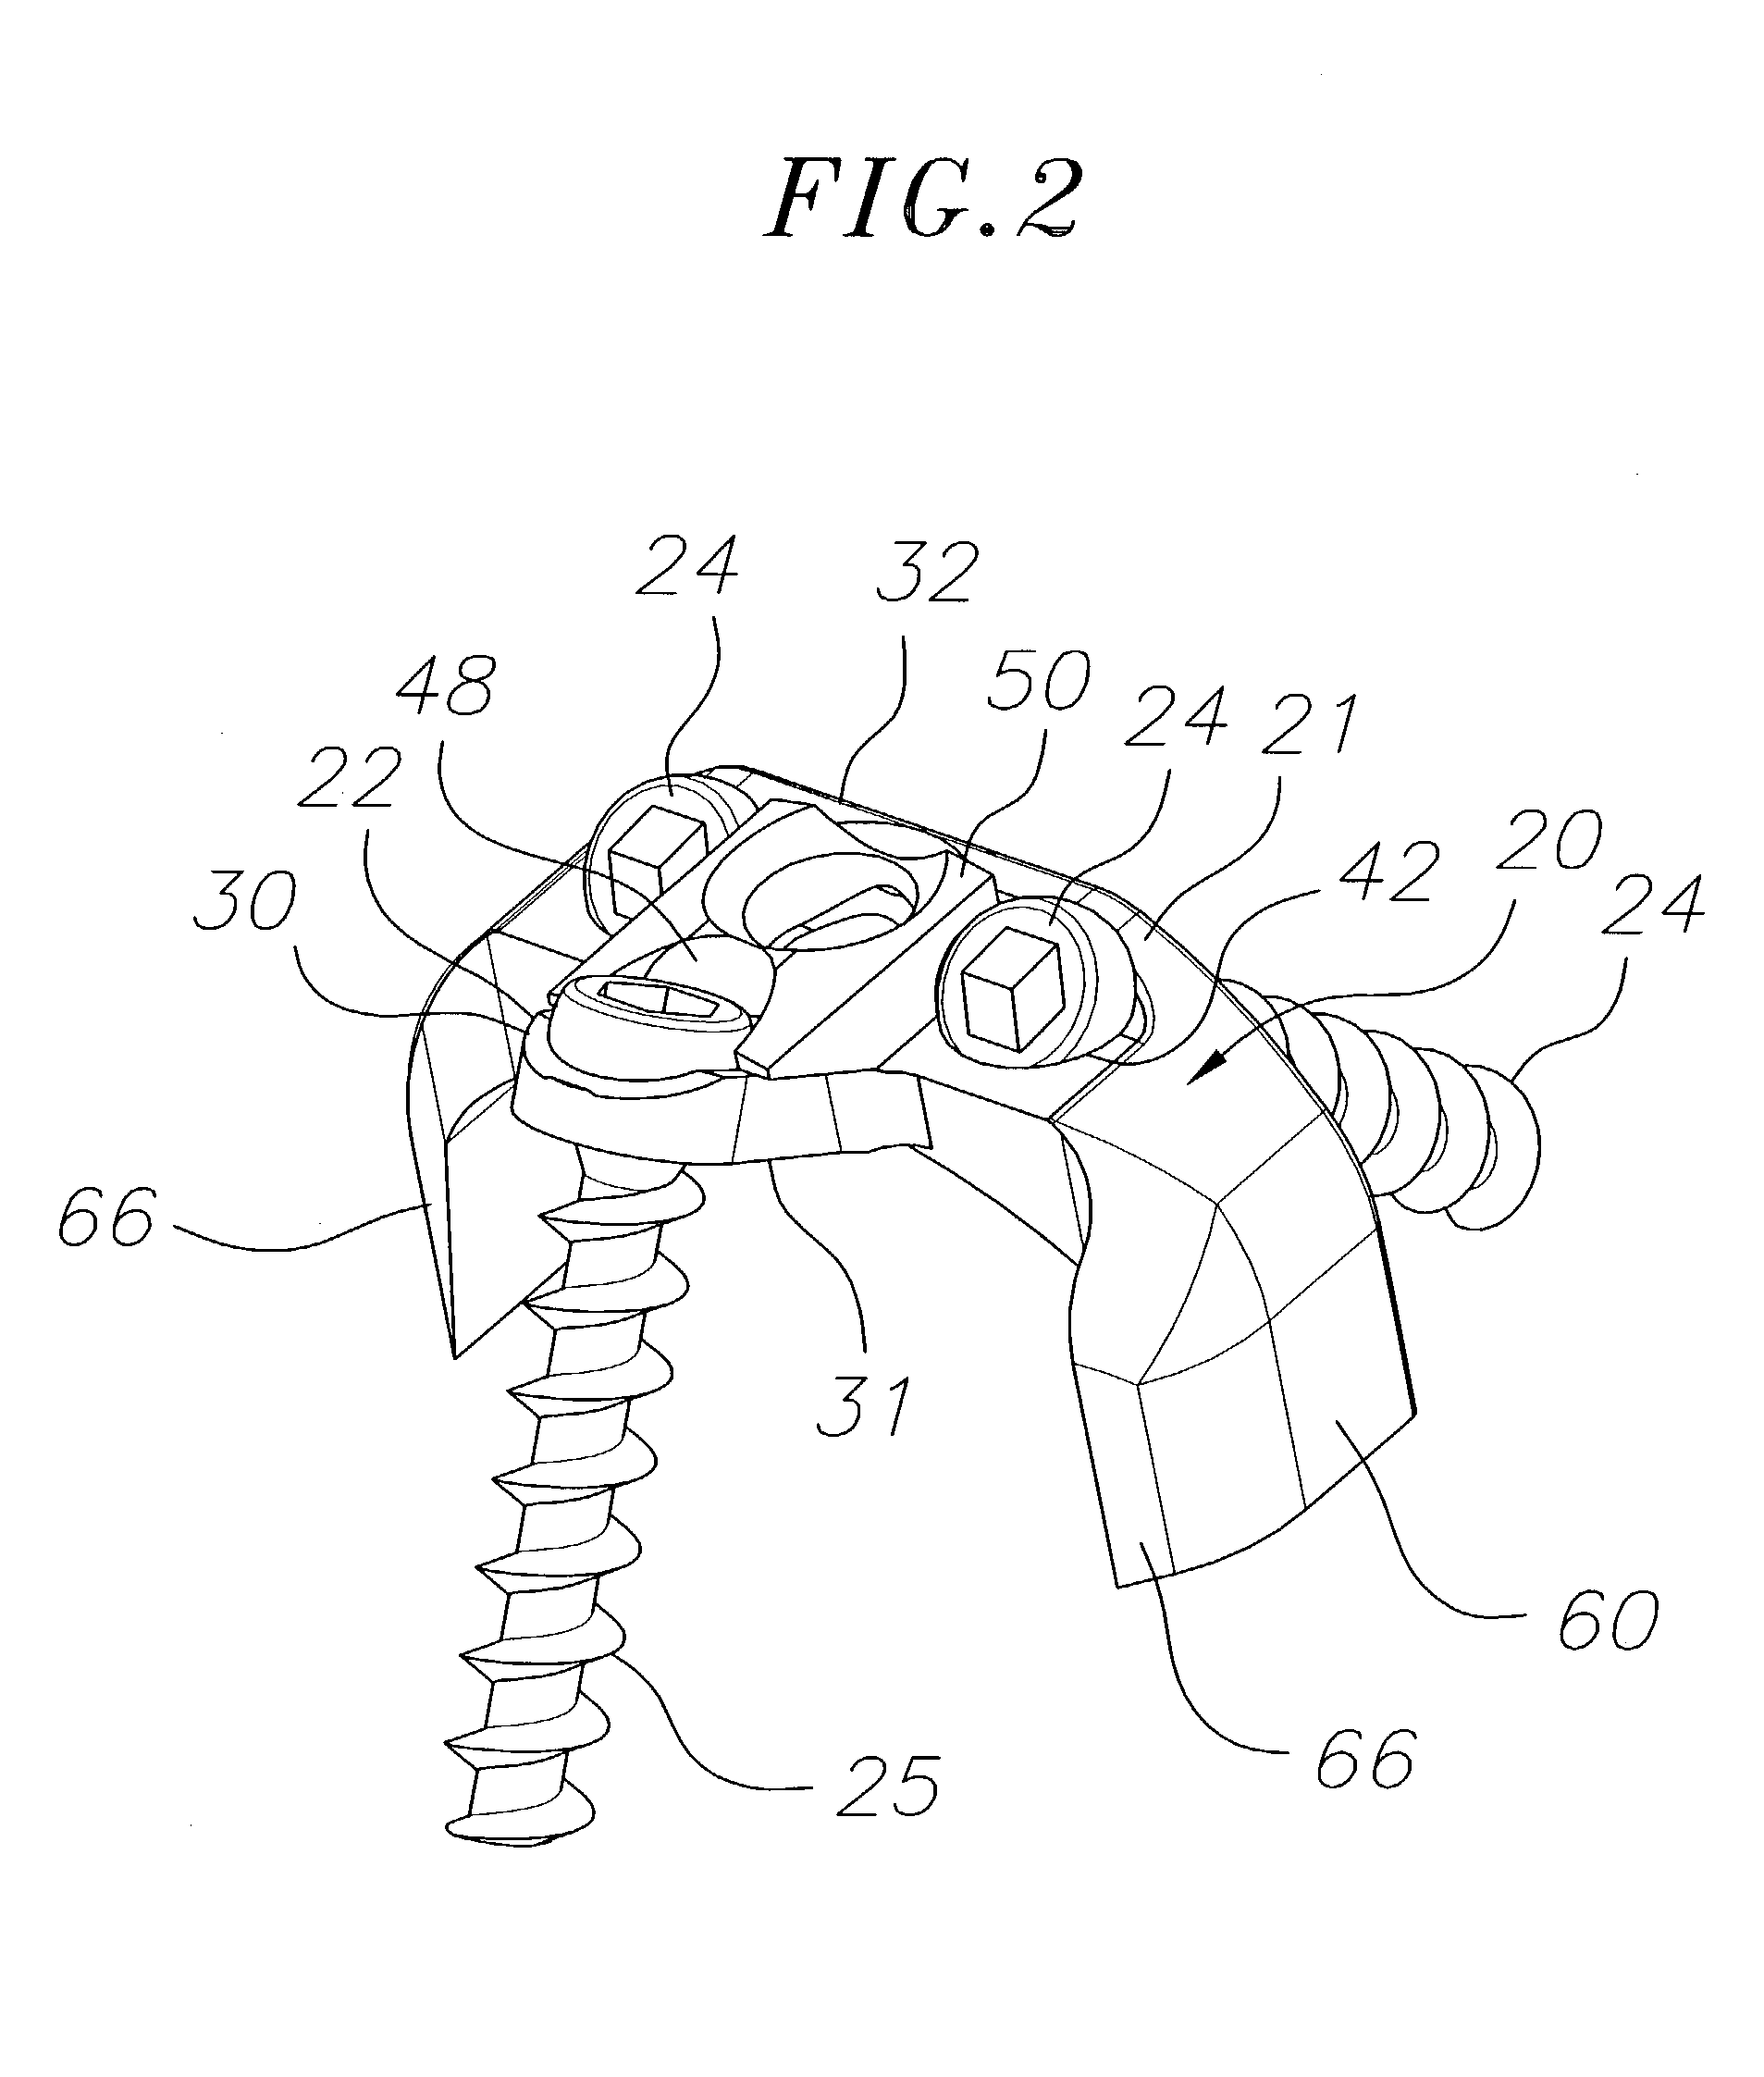 Bone plate stabilization system and method for its use